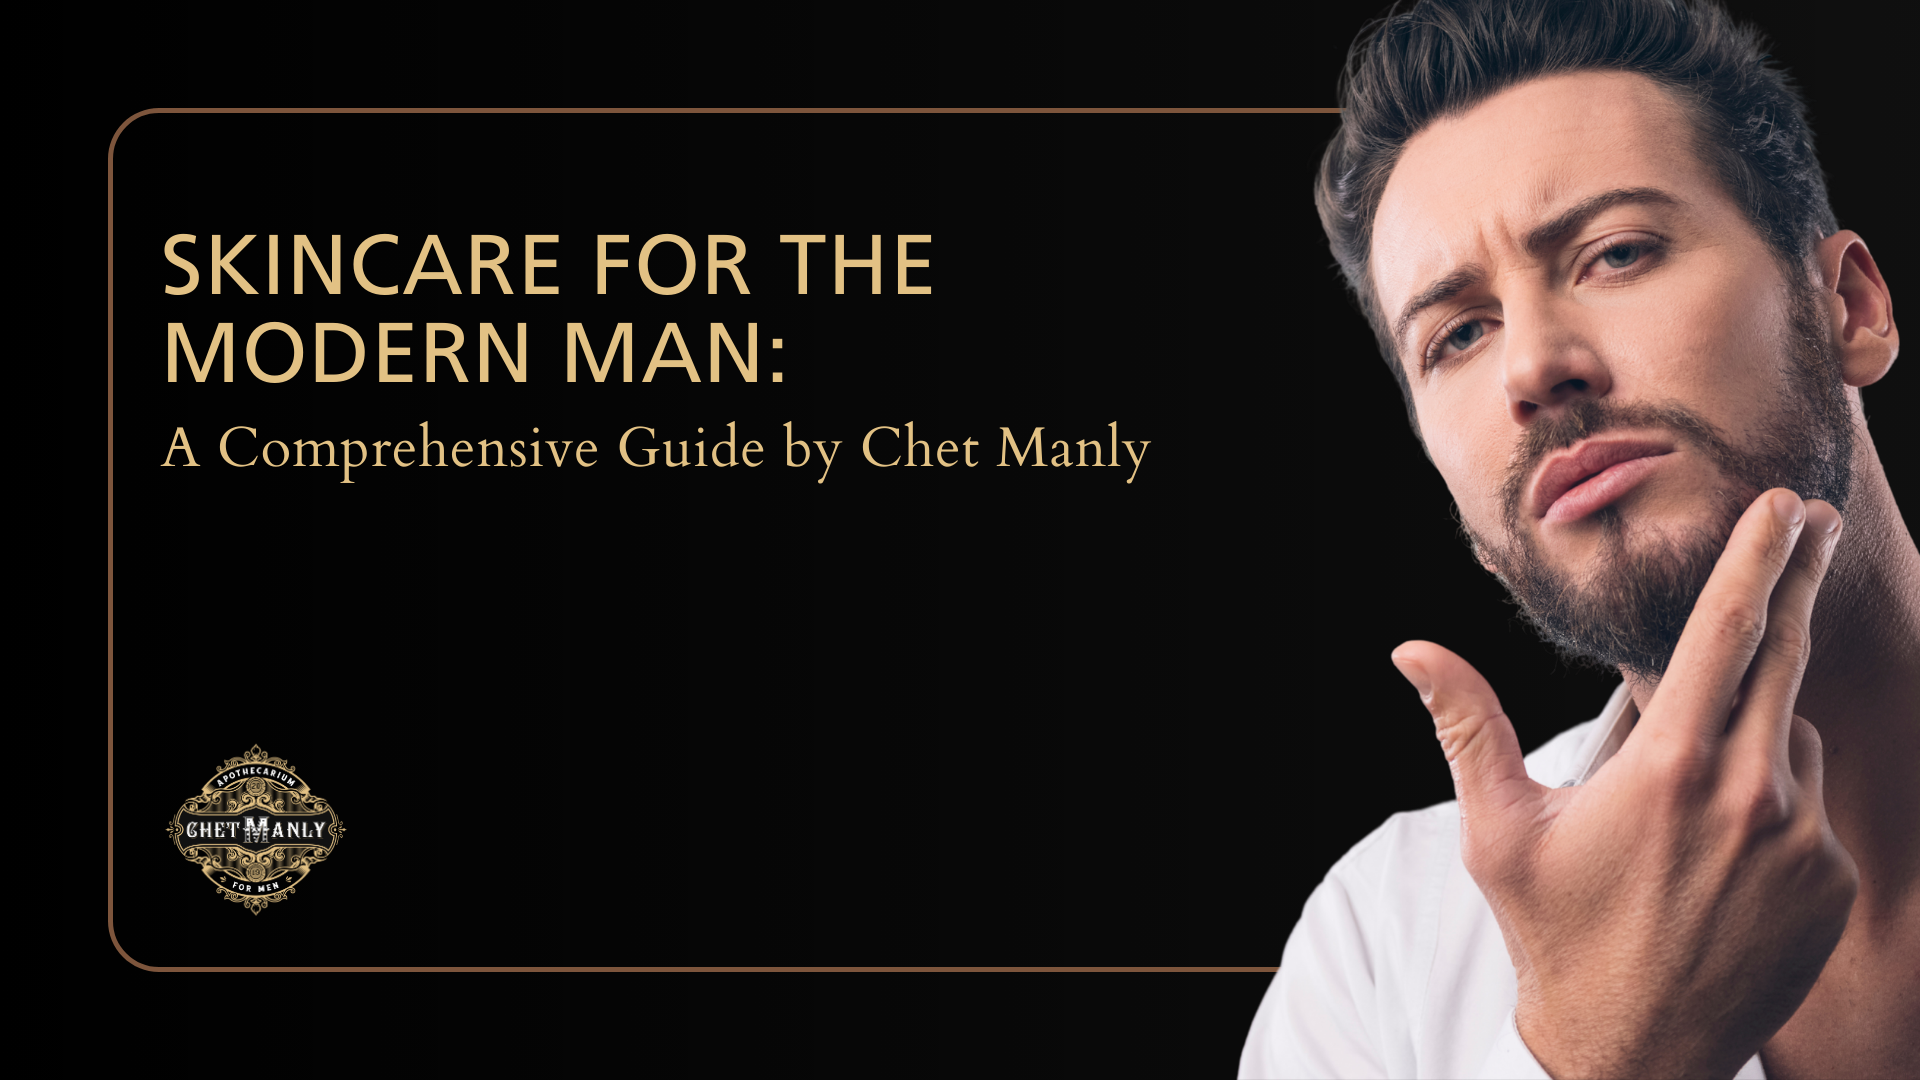 Skincare for the Modern Man: Chet Manly's Guide to Healthy Skin